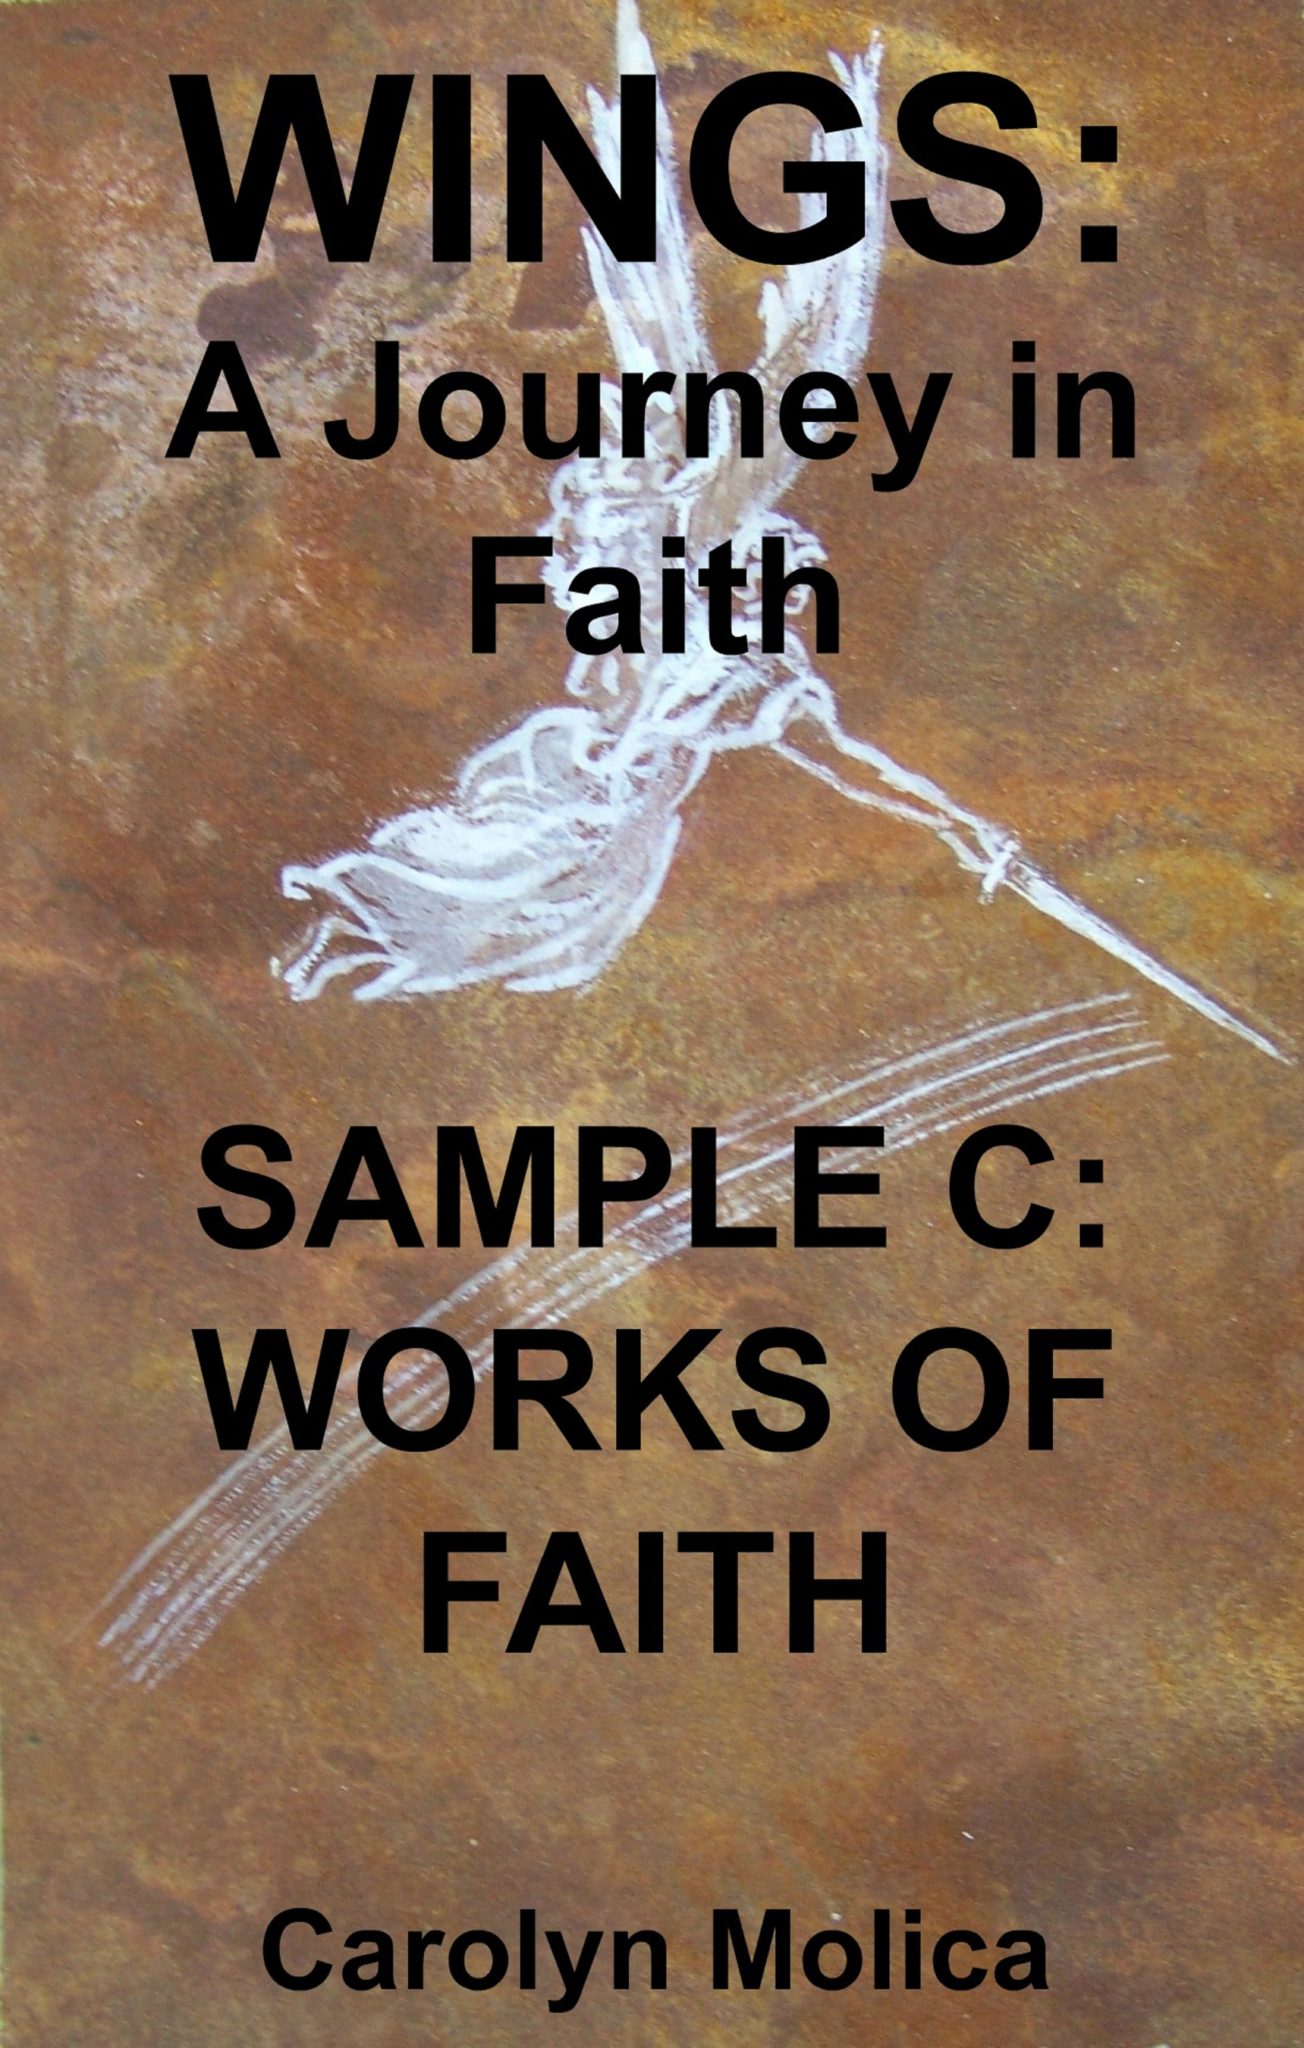 WINGS: A Journey in Faith Sample C [Kindle Edition] by Carolyn Molica